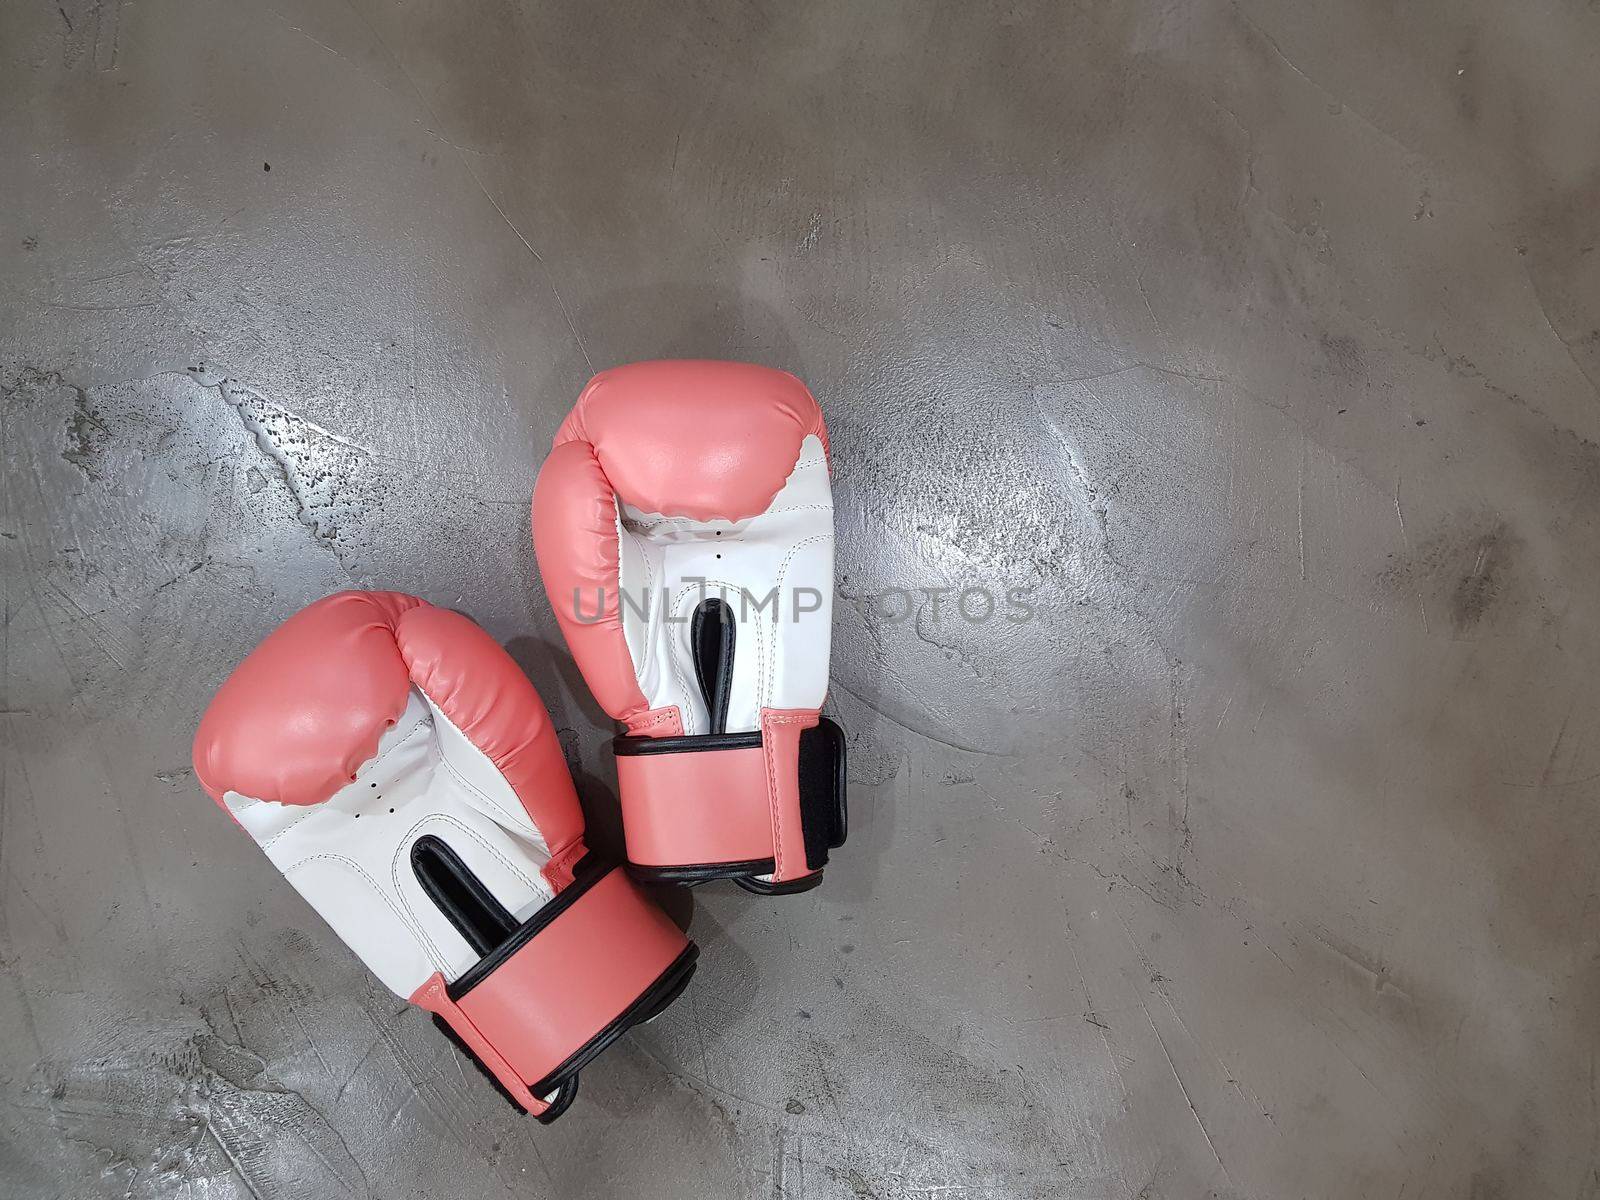 One pair of boxing gloves in red & white color.